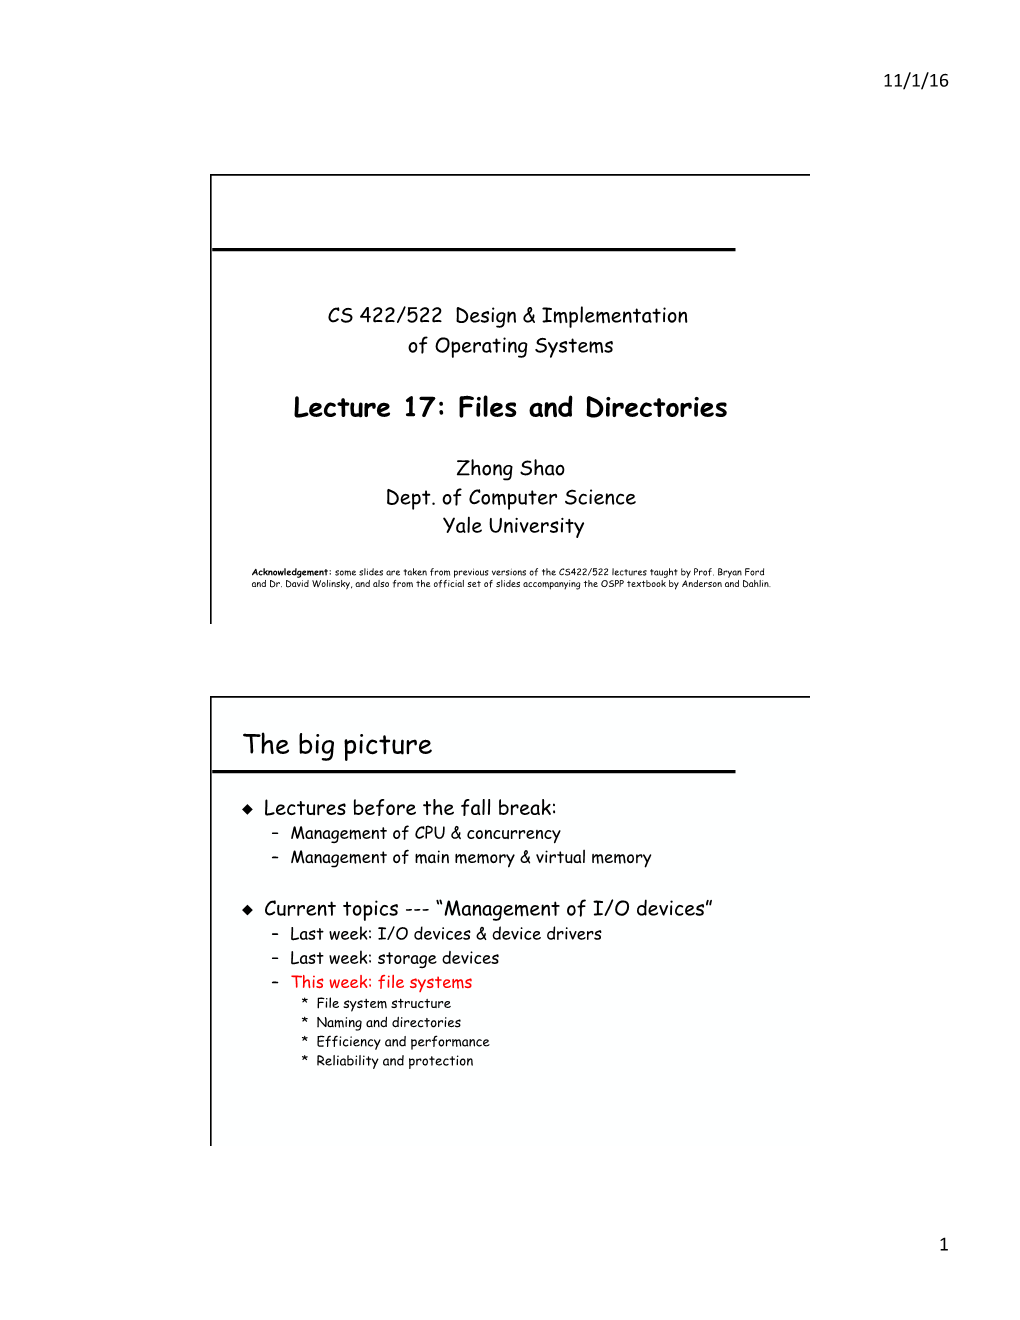 Lecture 17: Files and Directories